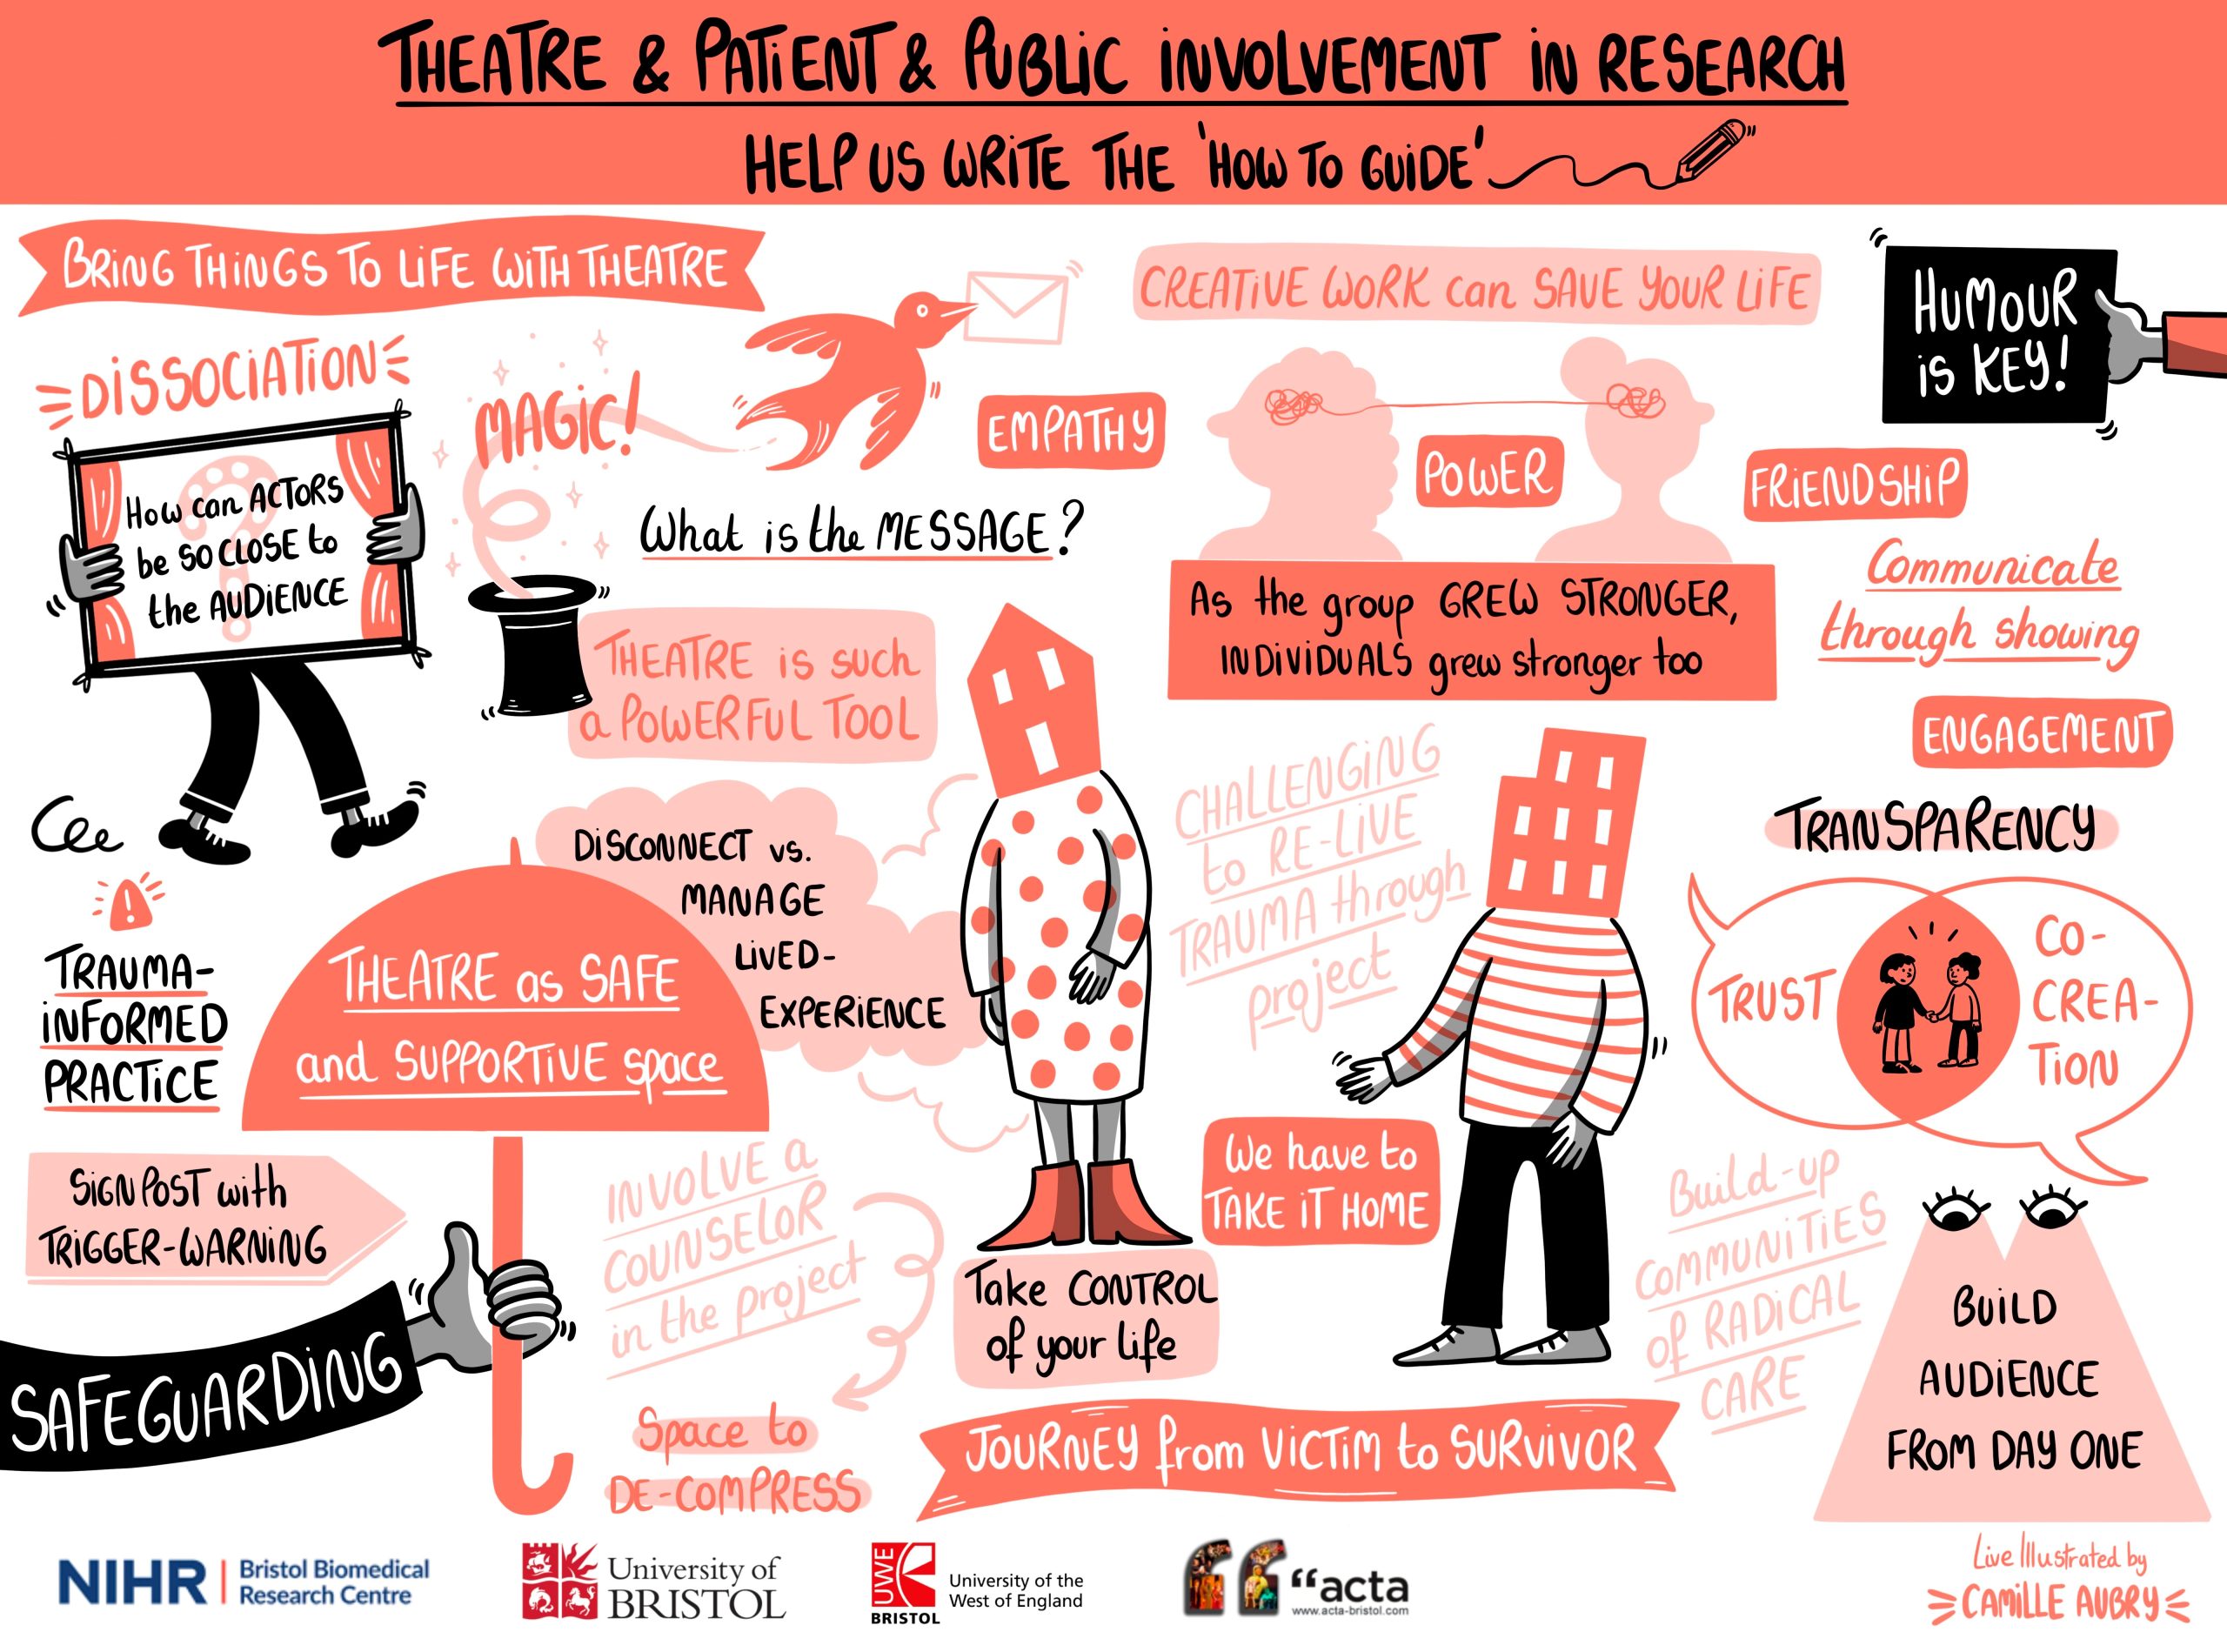 Illustration by Camille Aubry capturing themes discussed during live event